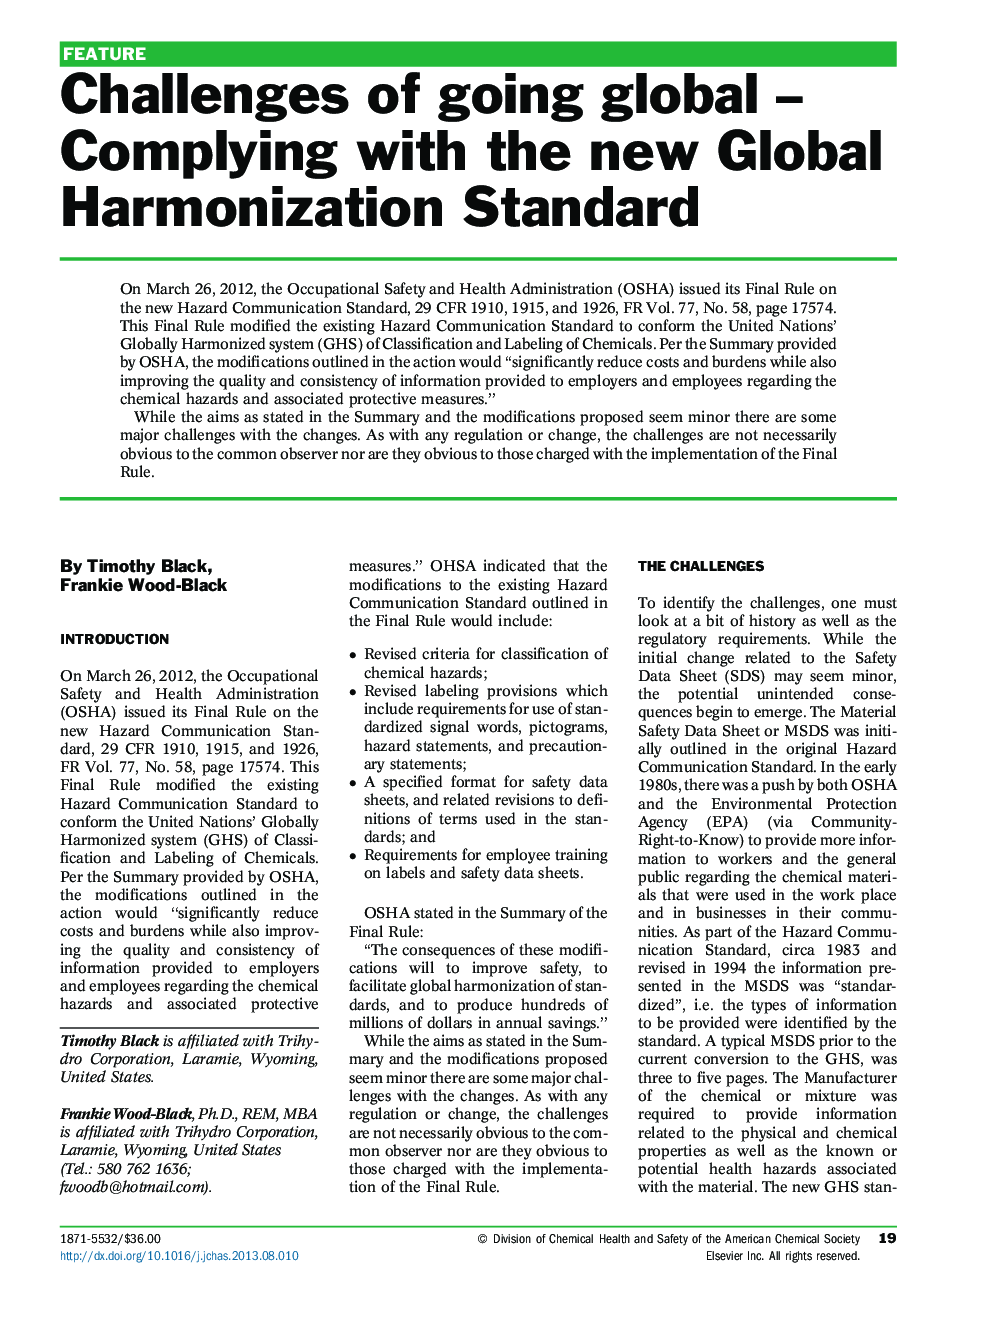 Challenges of going global – Complying with the new Global Harmonization Standard